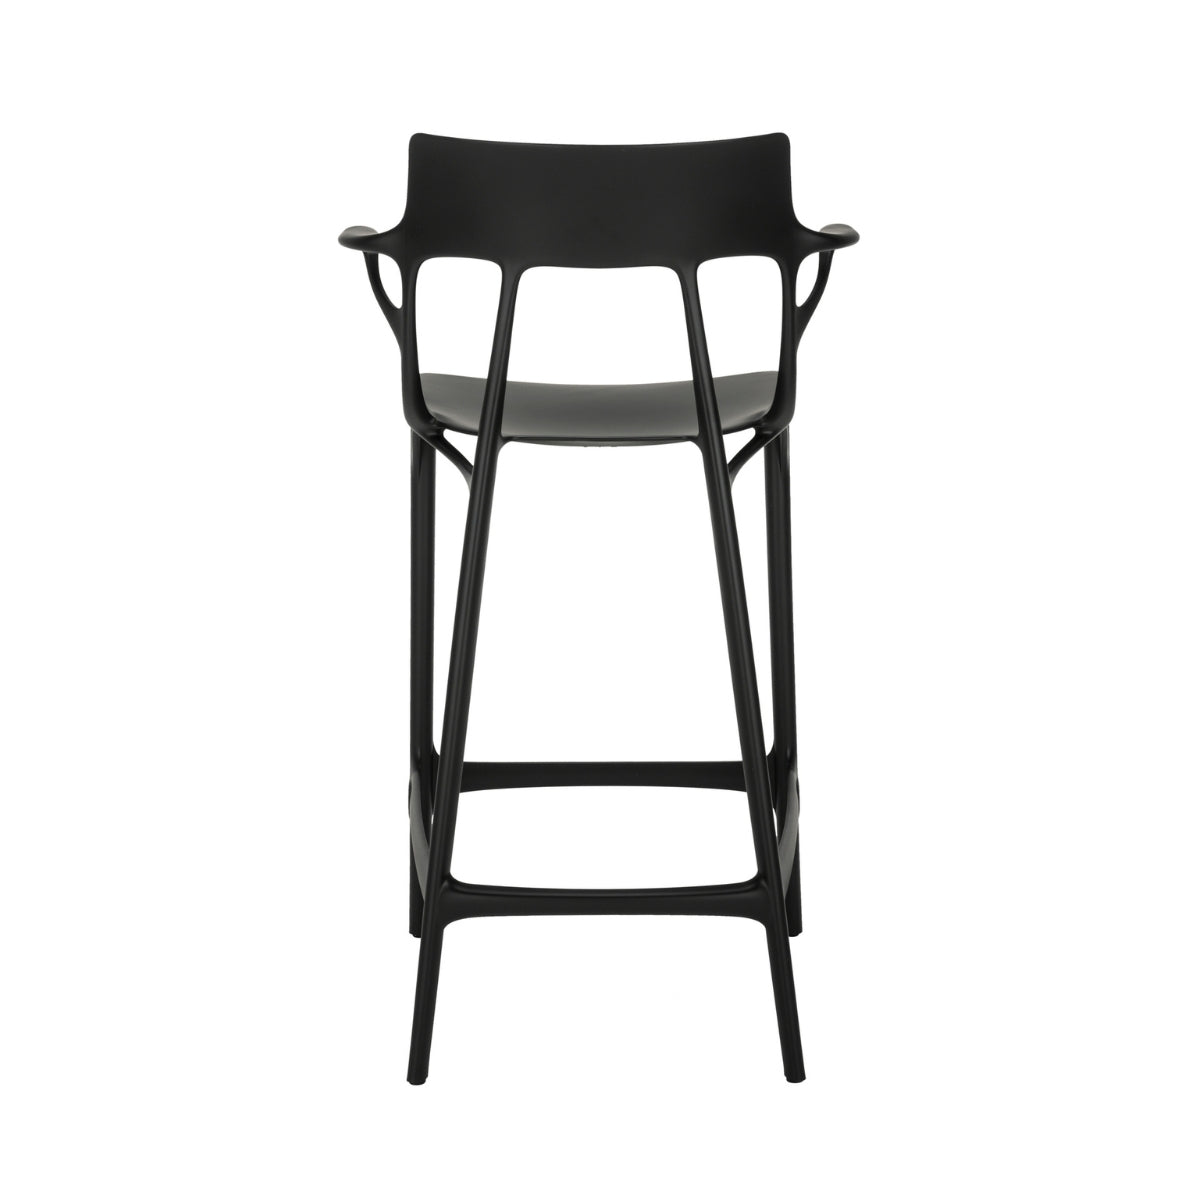 A.I. Stool Recycled - Kartell